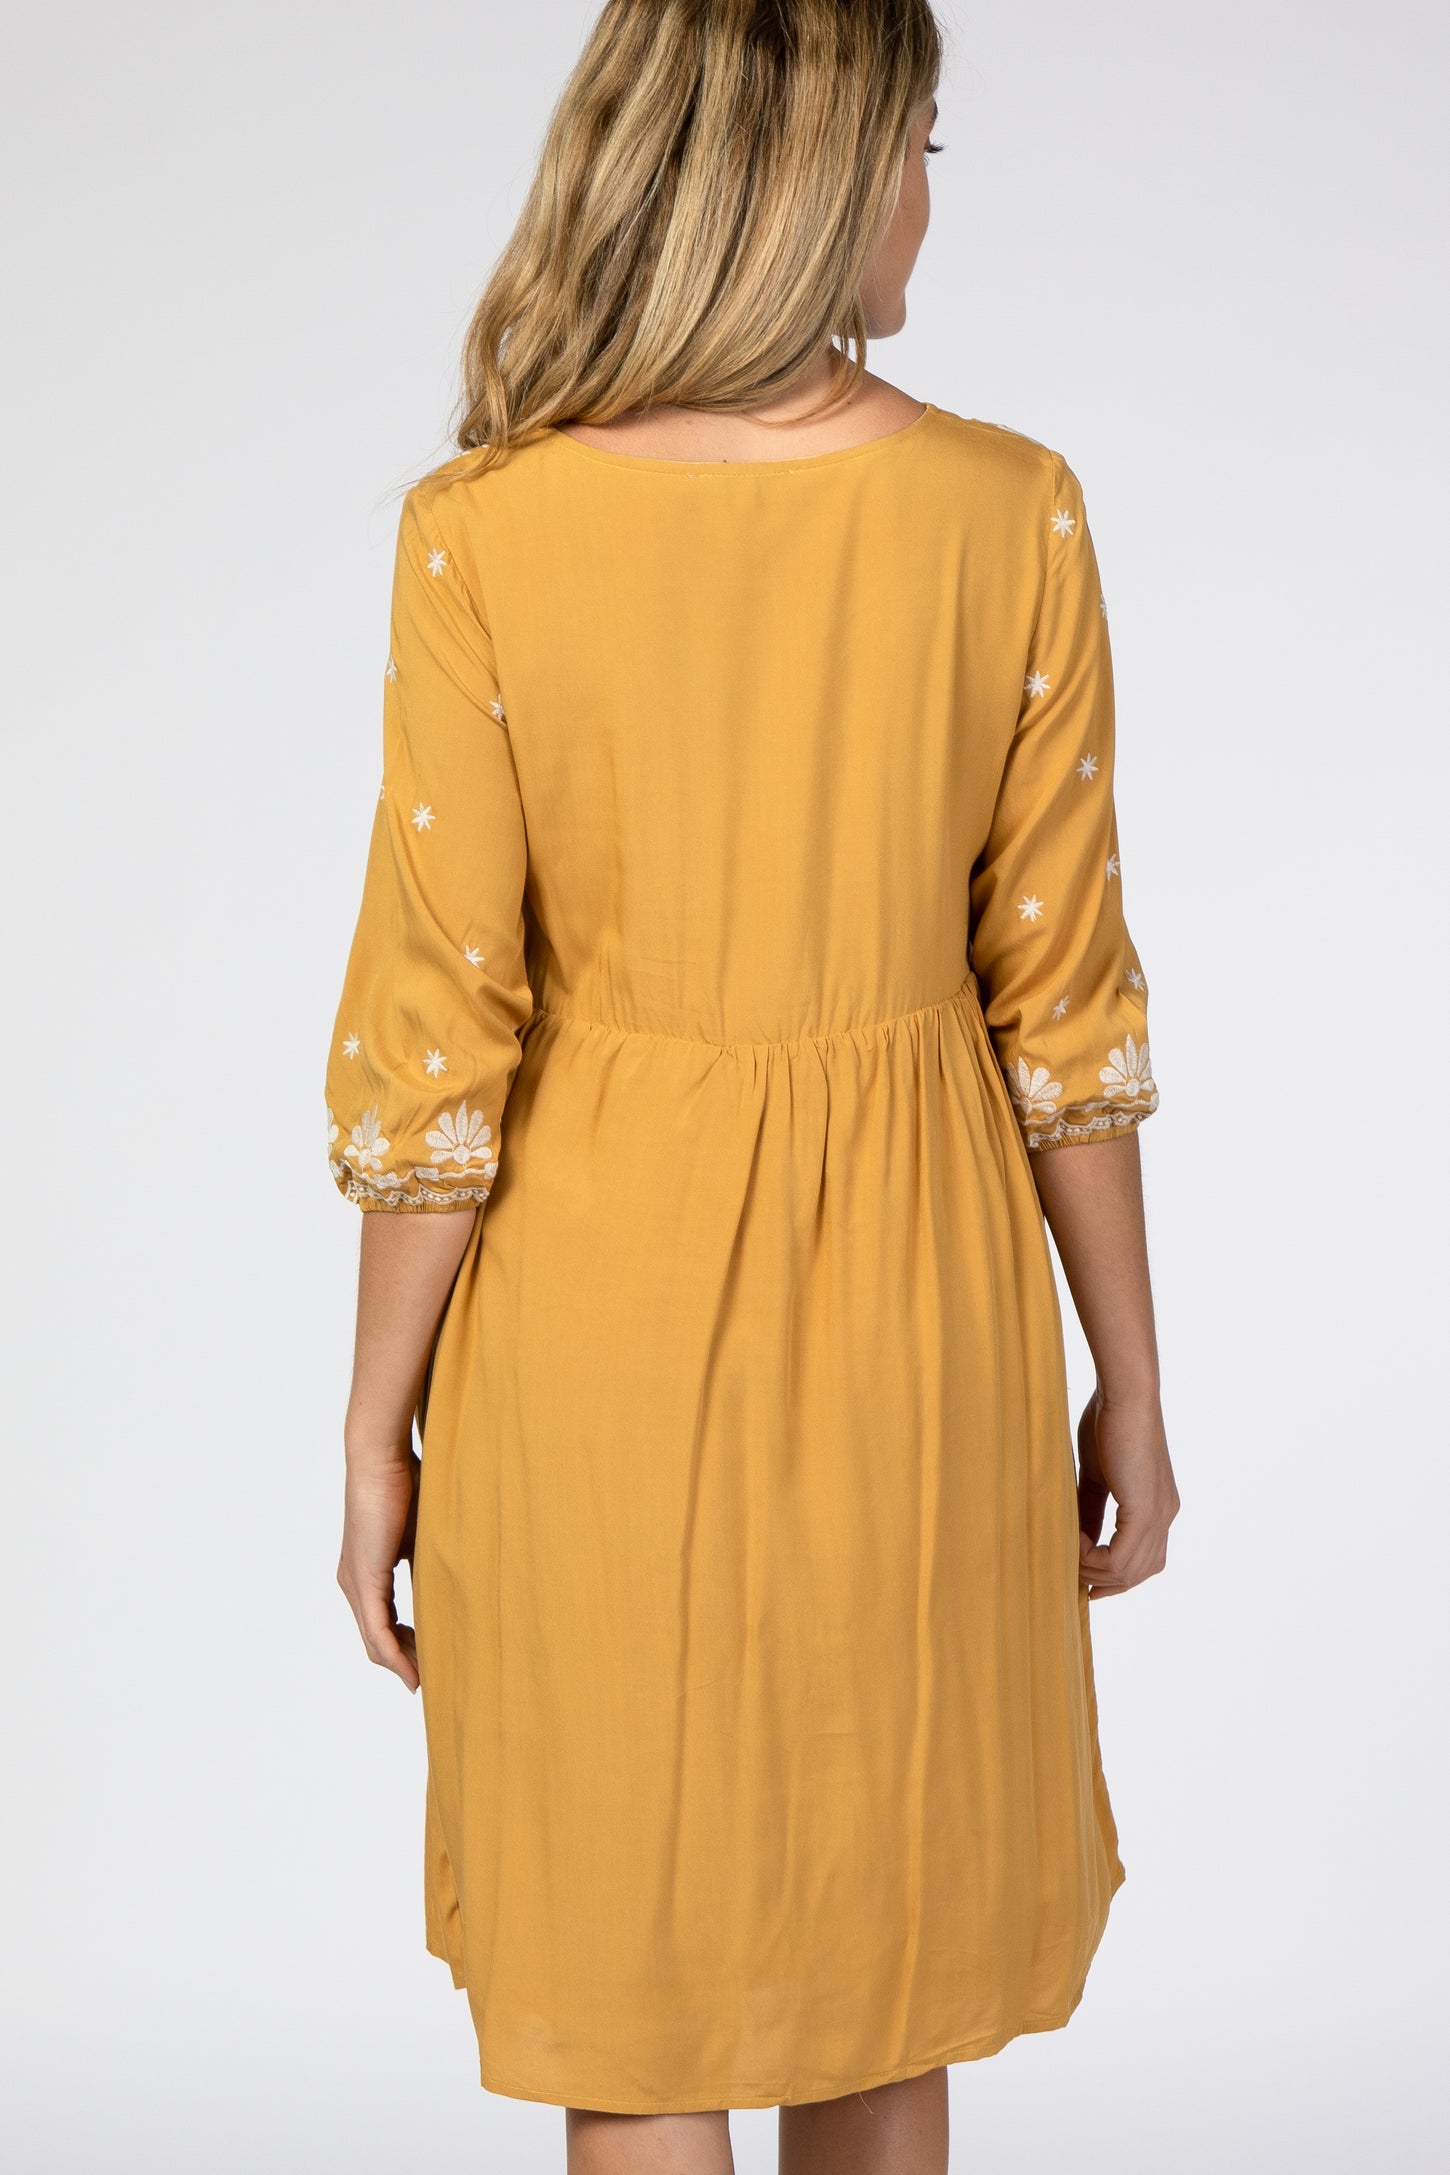 Yellow Embroidered Front Babydoll Maternity Dress